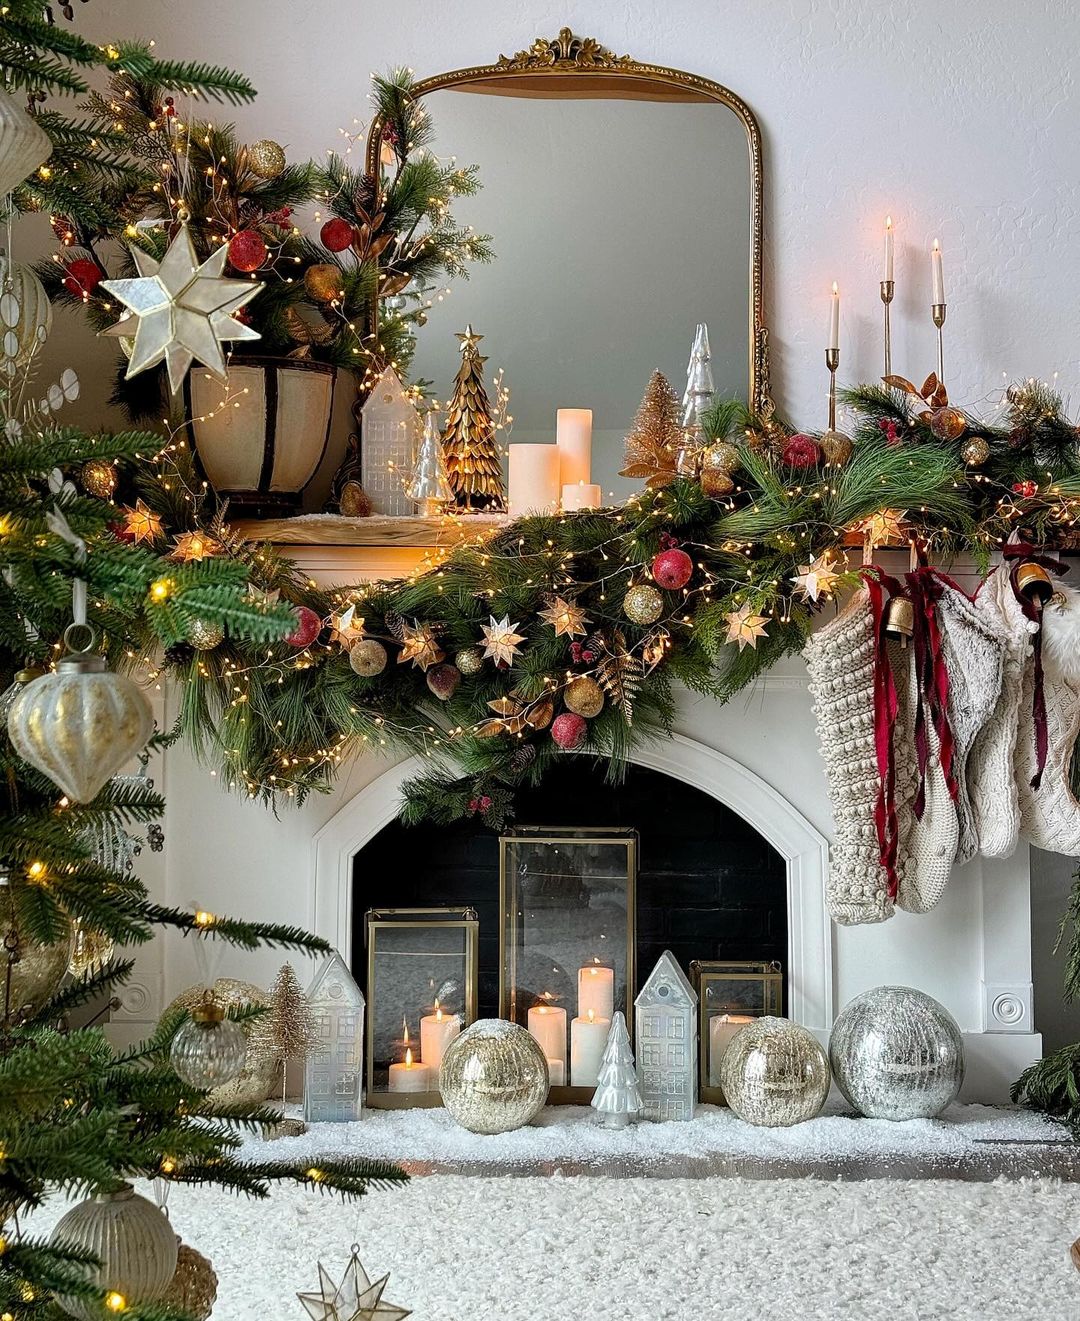 Festive Fireplace with Candles and Ornaments